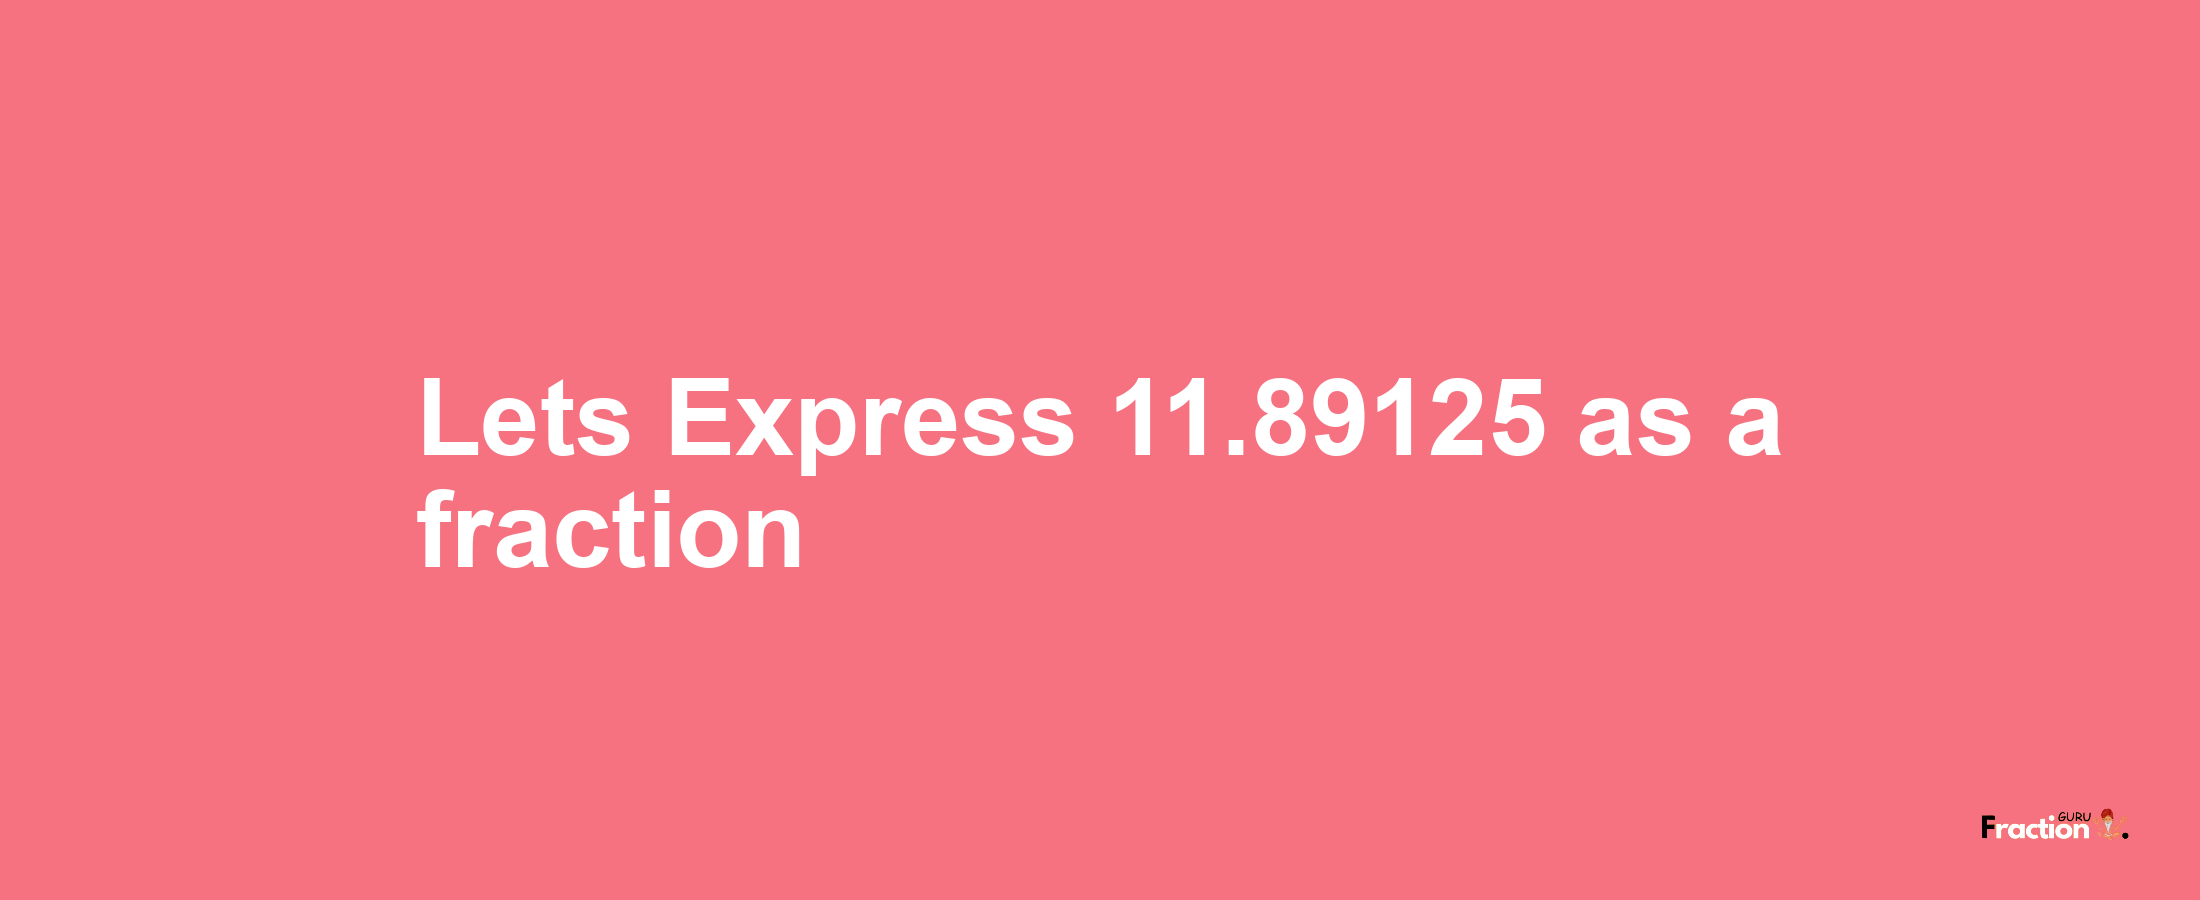 Lets Express 11.89125 as afraction